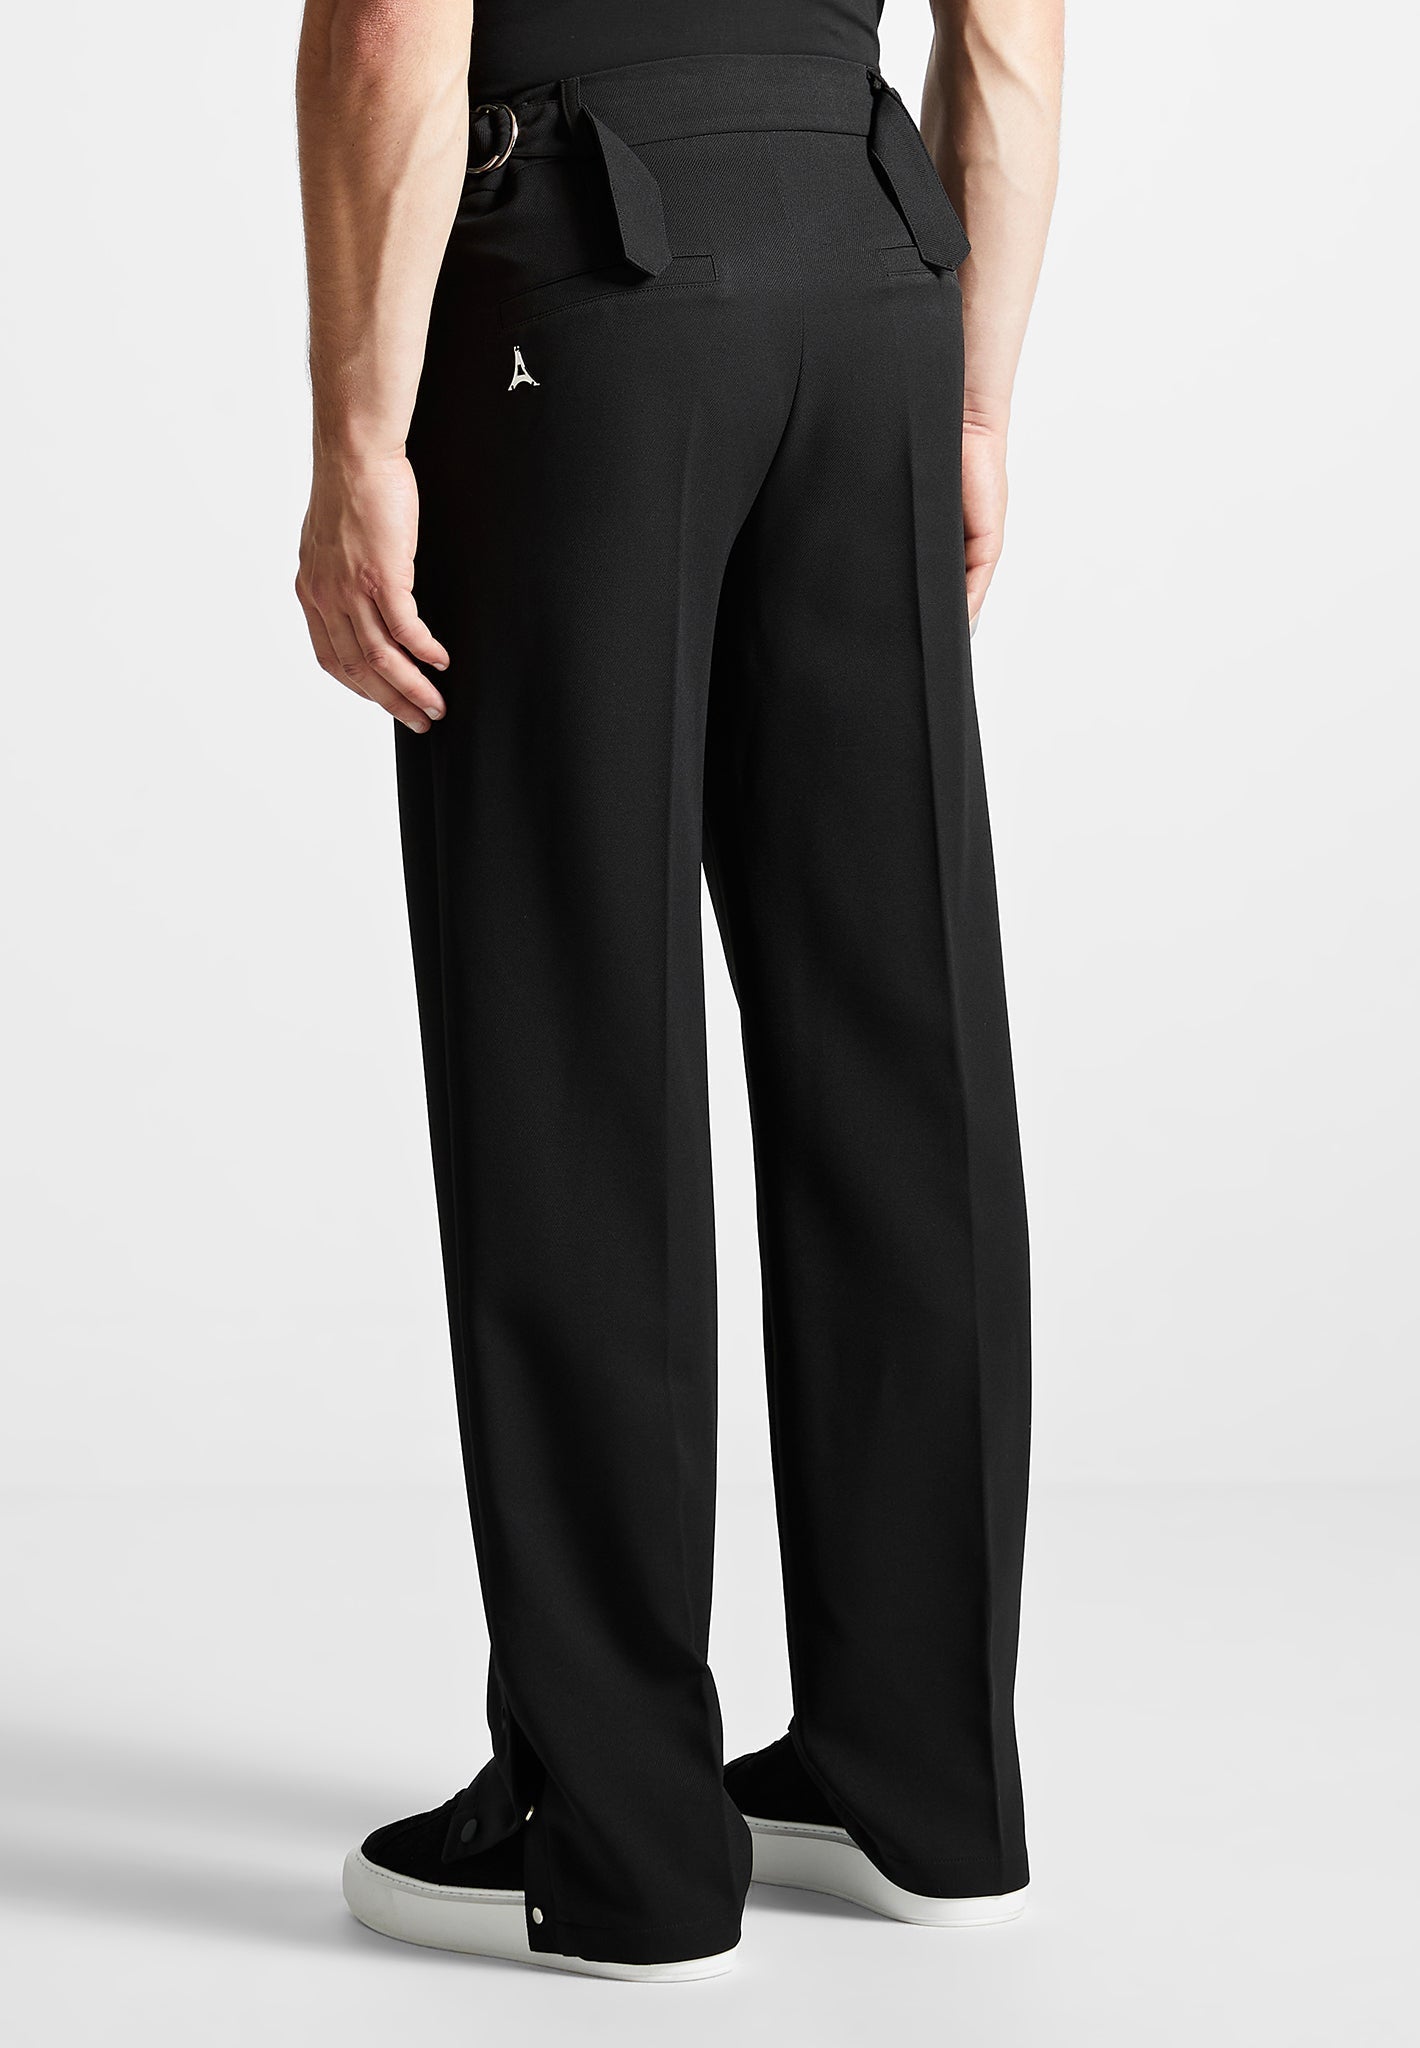 Wide Boy trousers (new fabric options available) – Scott Fraser Collection